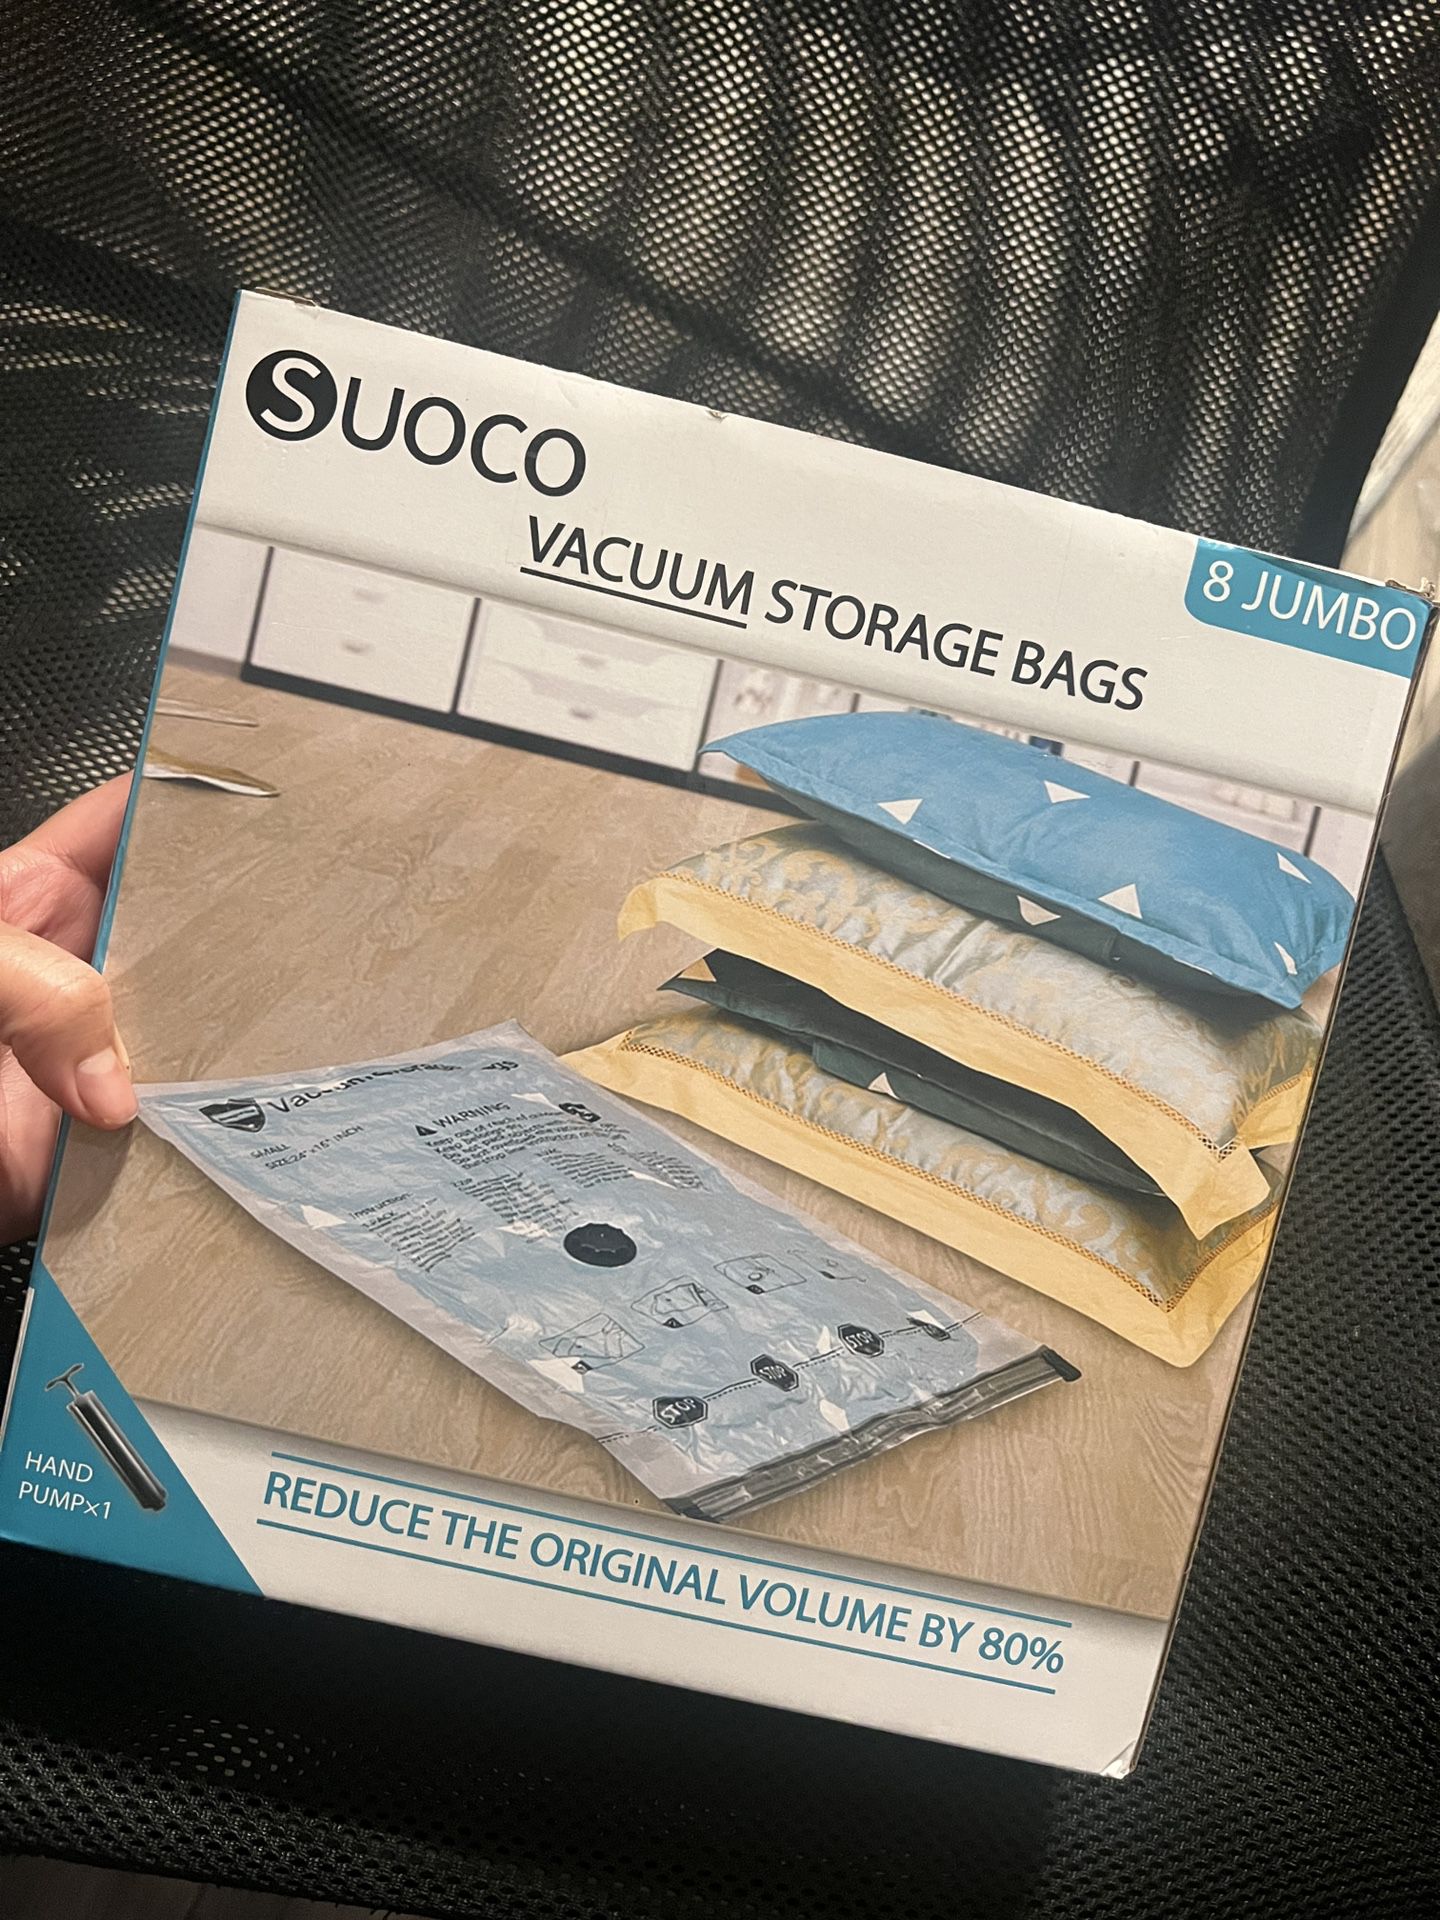 SUOCO 8 Jumbo Vacuum Storage Bags, Space Saver Bags with Travel Hand Pump, Compression Airtight Sealer Bags for Clothes, Bedding, Pillows, Comforters,